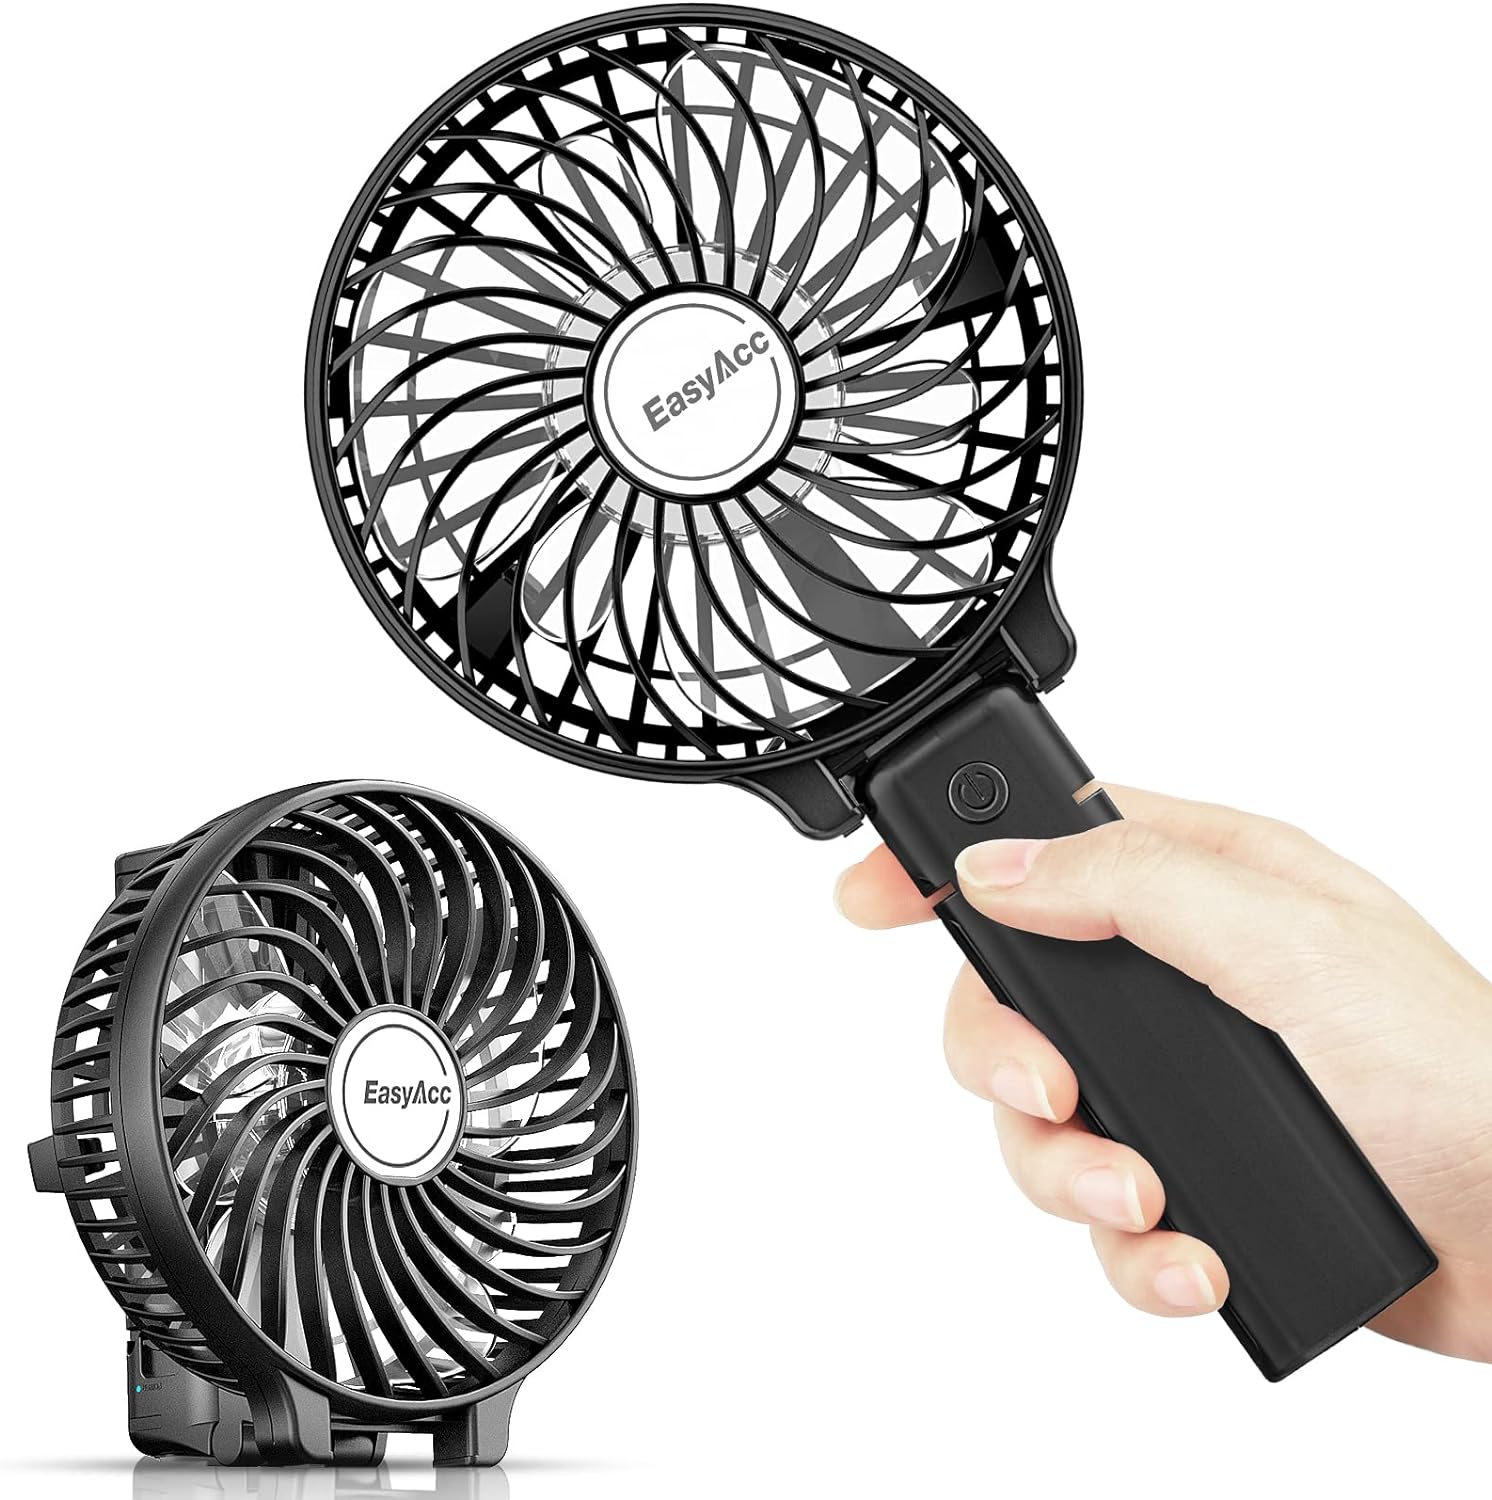 This portable handheld fan is amazing. This is my 2nd purchase because I love it that much. It is REALLY powerful and you will be surprised how strong it blows for such a small fan. It has 3 speeds and runs for a very long time on one charge. I love that it is USB and doesn't need batteries. We RV camp a lot and this fan has saved me from melting and I won't camp without it. I bought this 2nd one to carry with me in my handbag for when we are out walking in the summer heat. It can be hand-held o